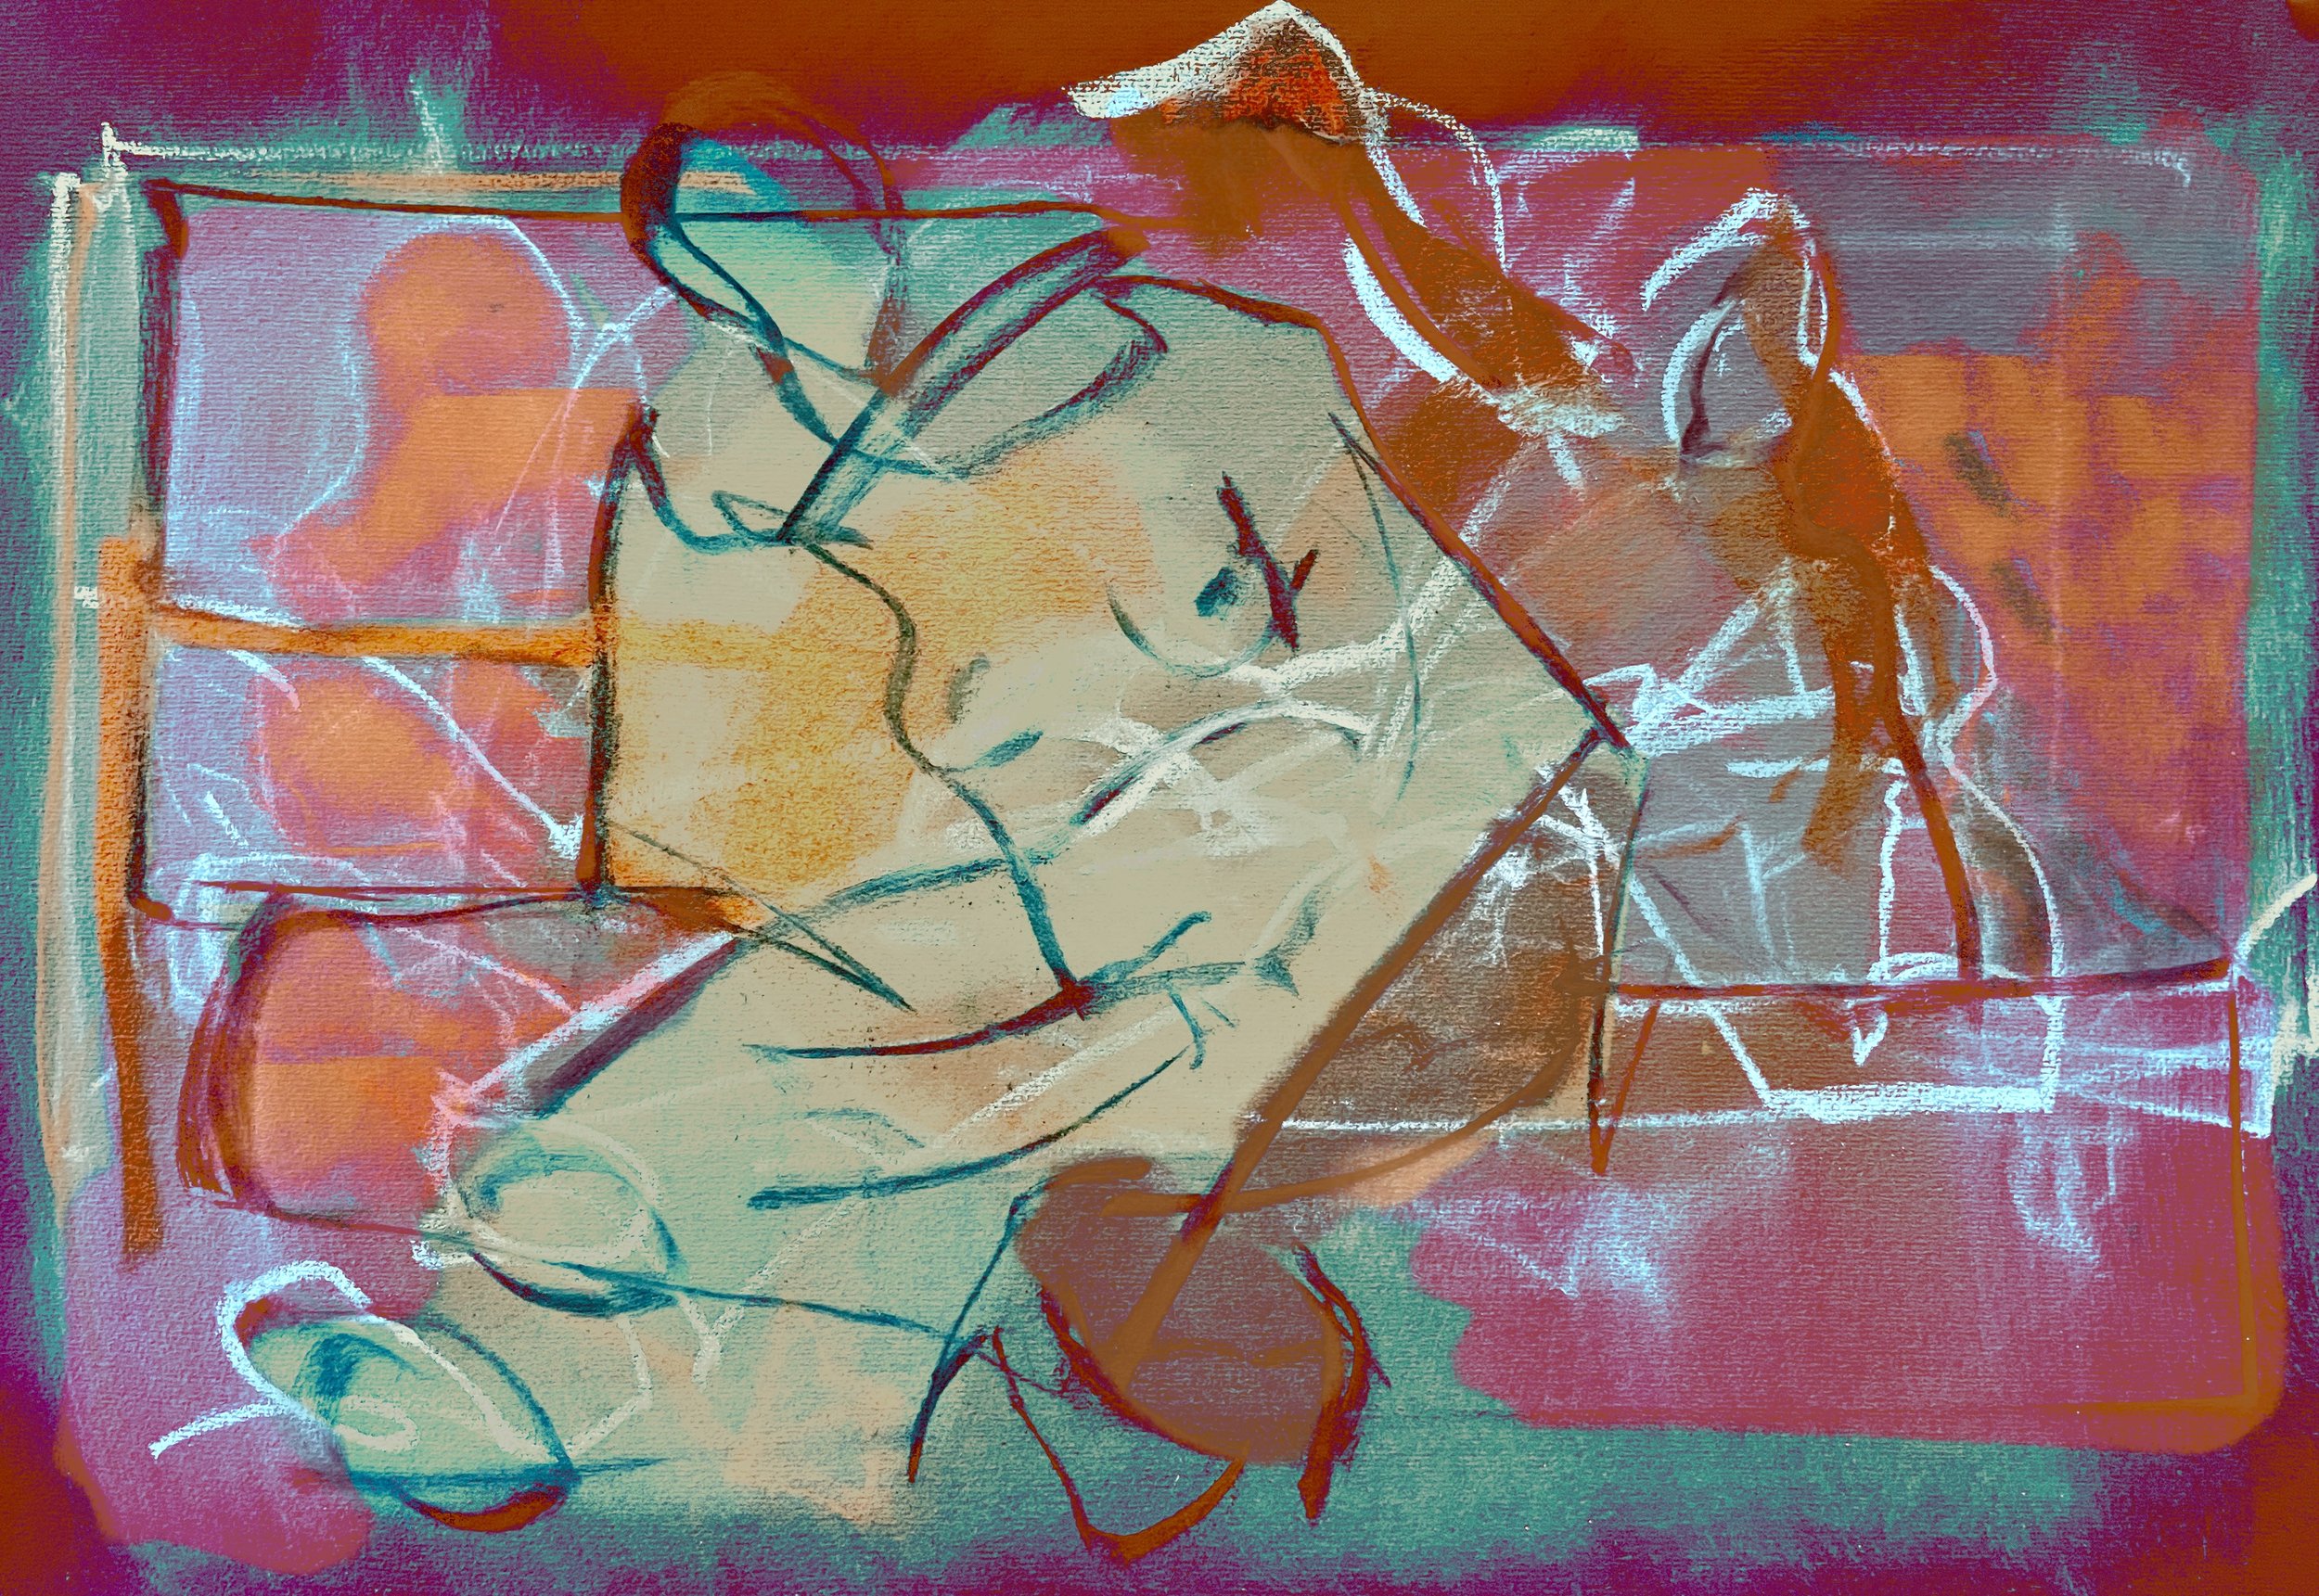 N.B. Reclining Neon, Digital Painting, 36 by 18 inches, 2023.